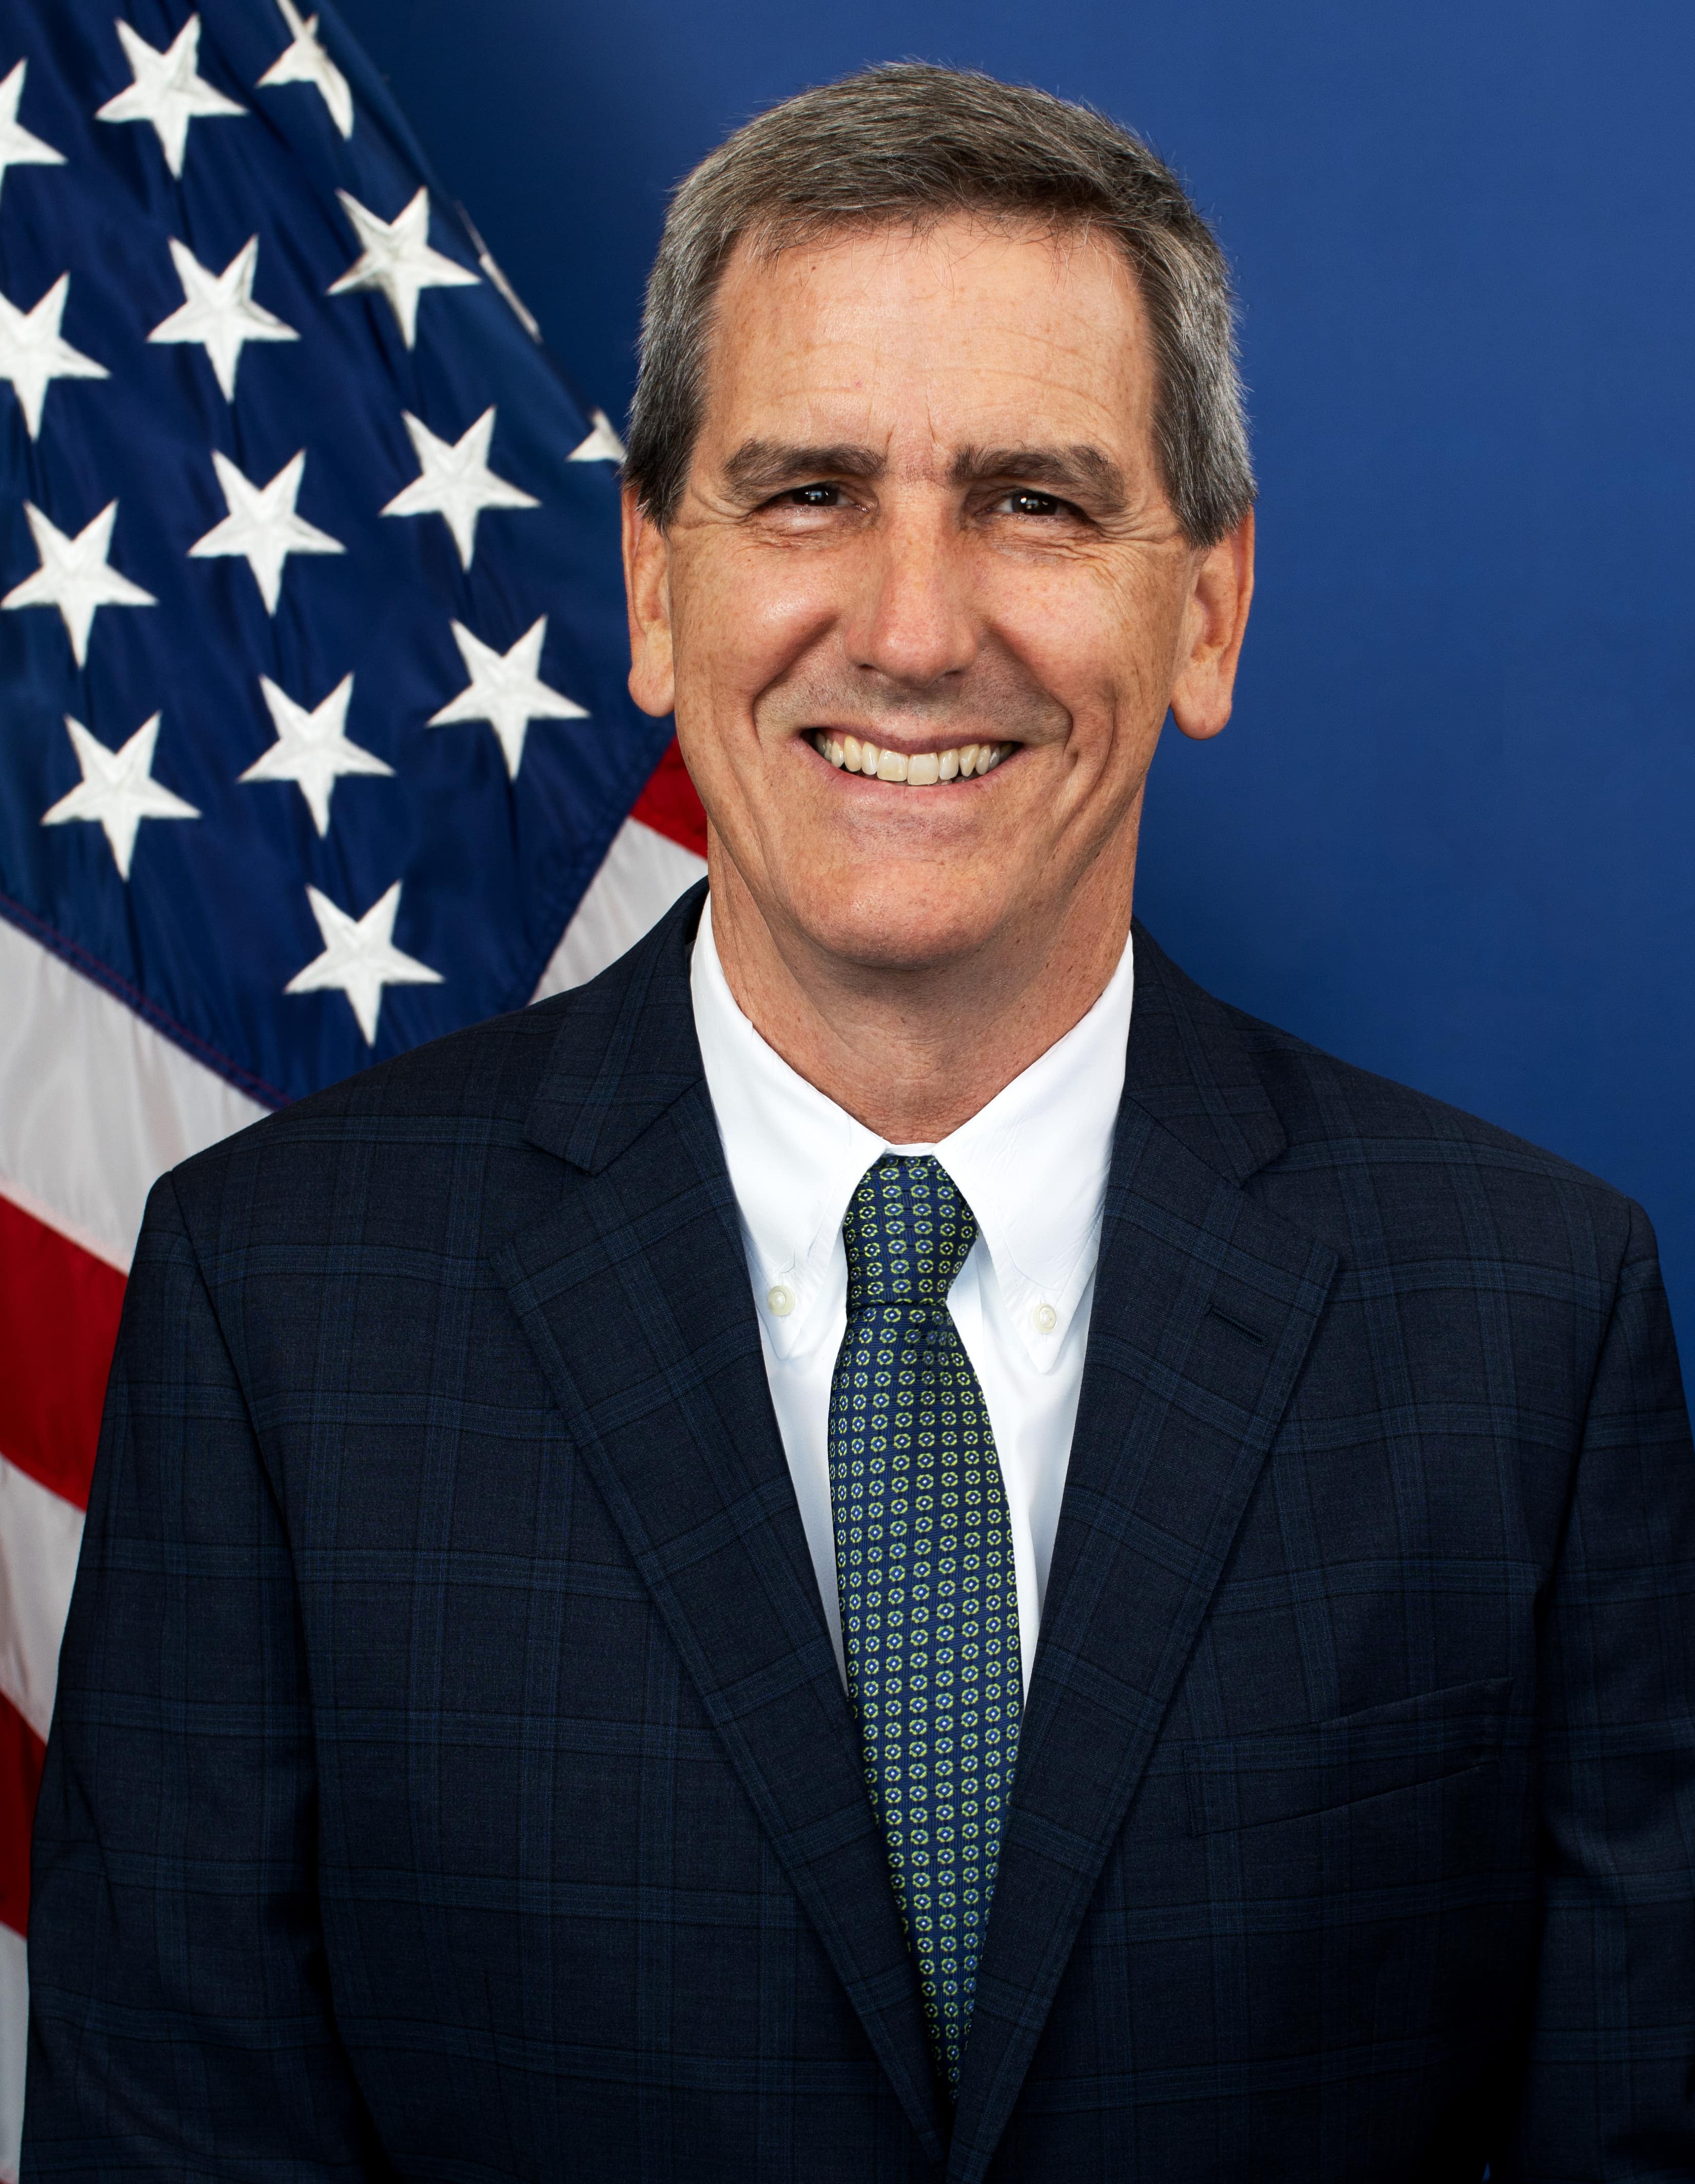 A headshot of Michael Whitaker wearing a suit and tie.  There is an American flag behind Michael.